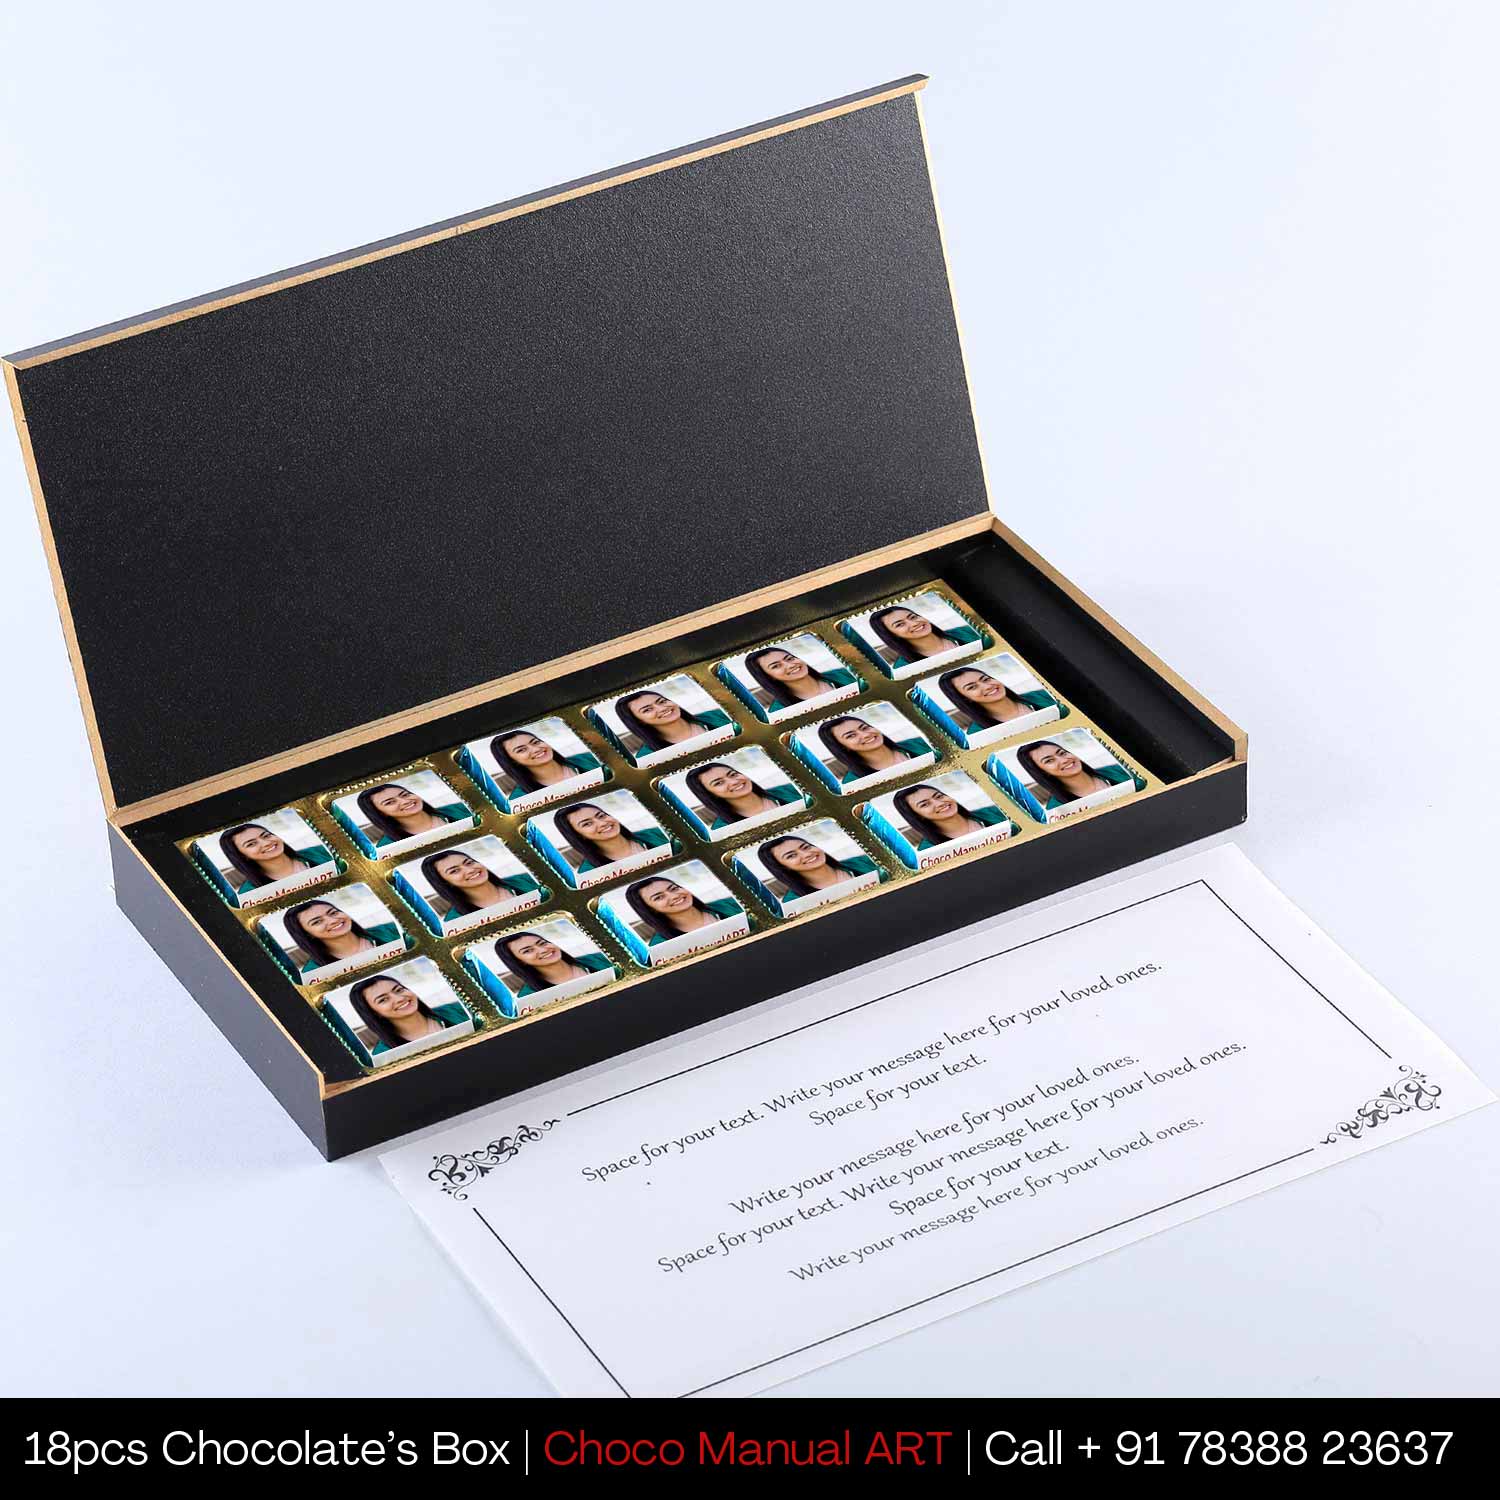 Employees' Birthday gift with personalization I Wooden packaging I Chocolate gift box